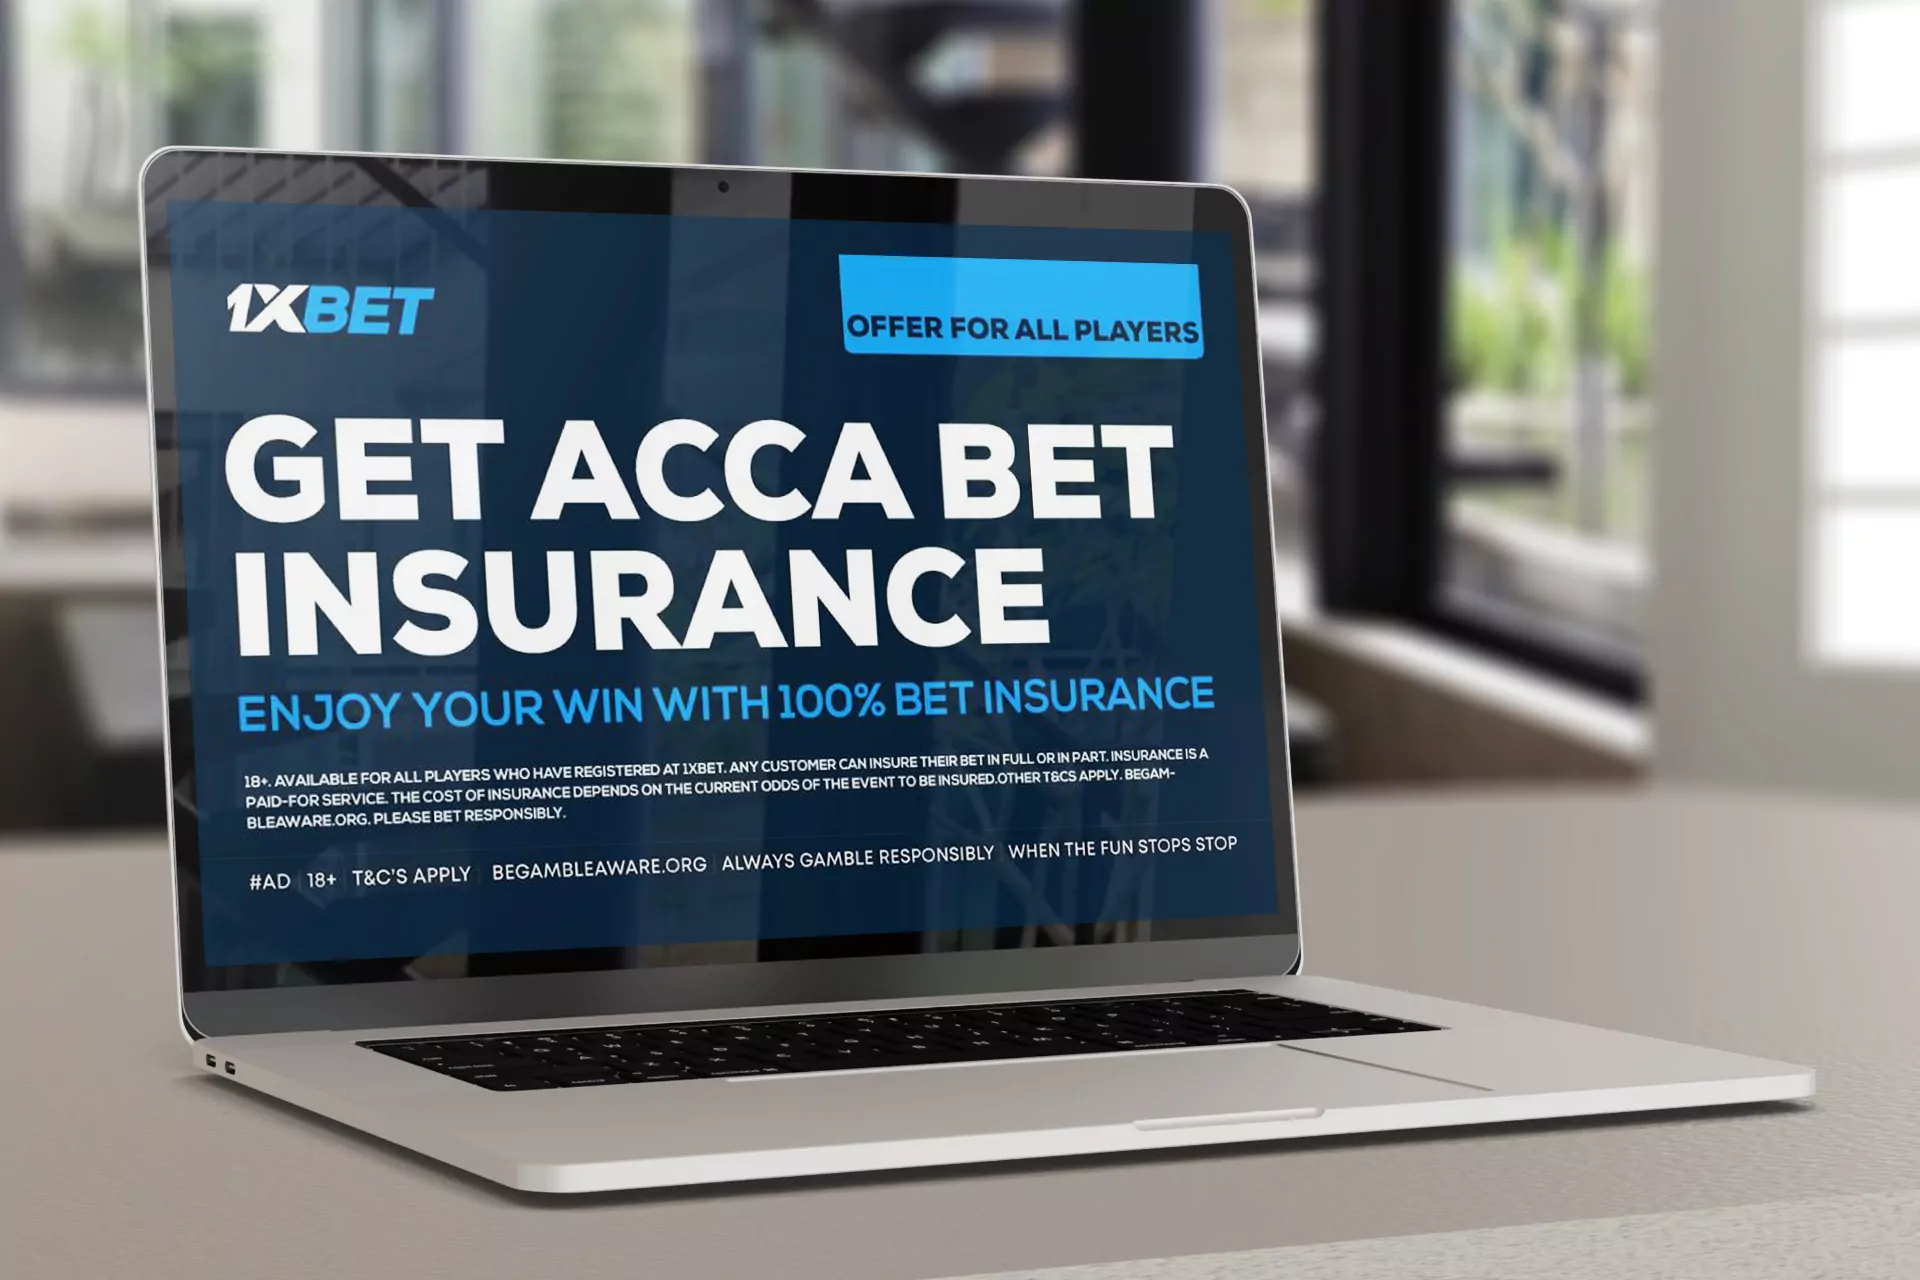 1xBet users can insure their bets.